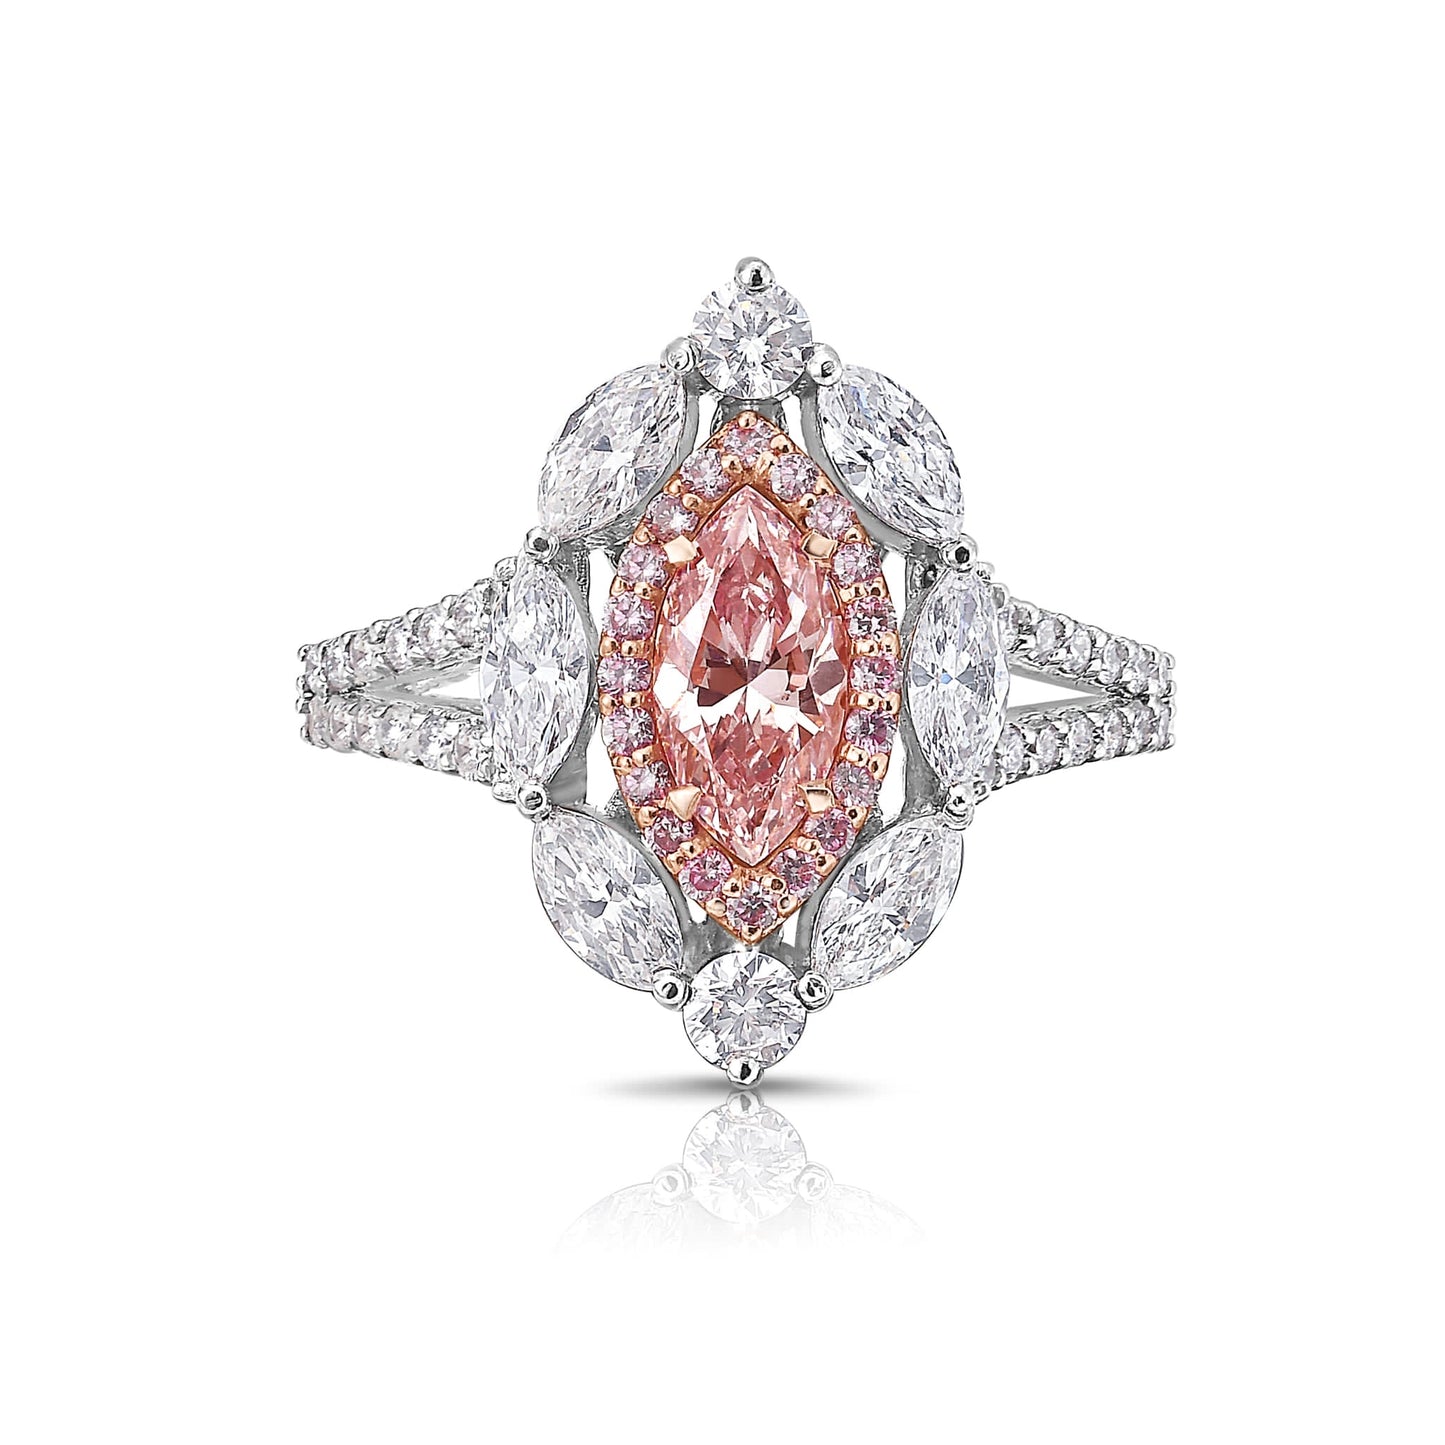 Pink marquise diamond ring with white pear shape diamonds surrounding